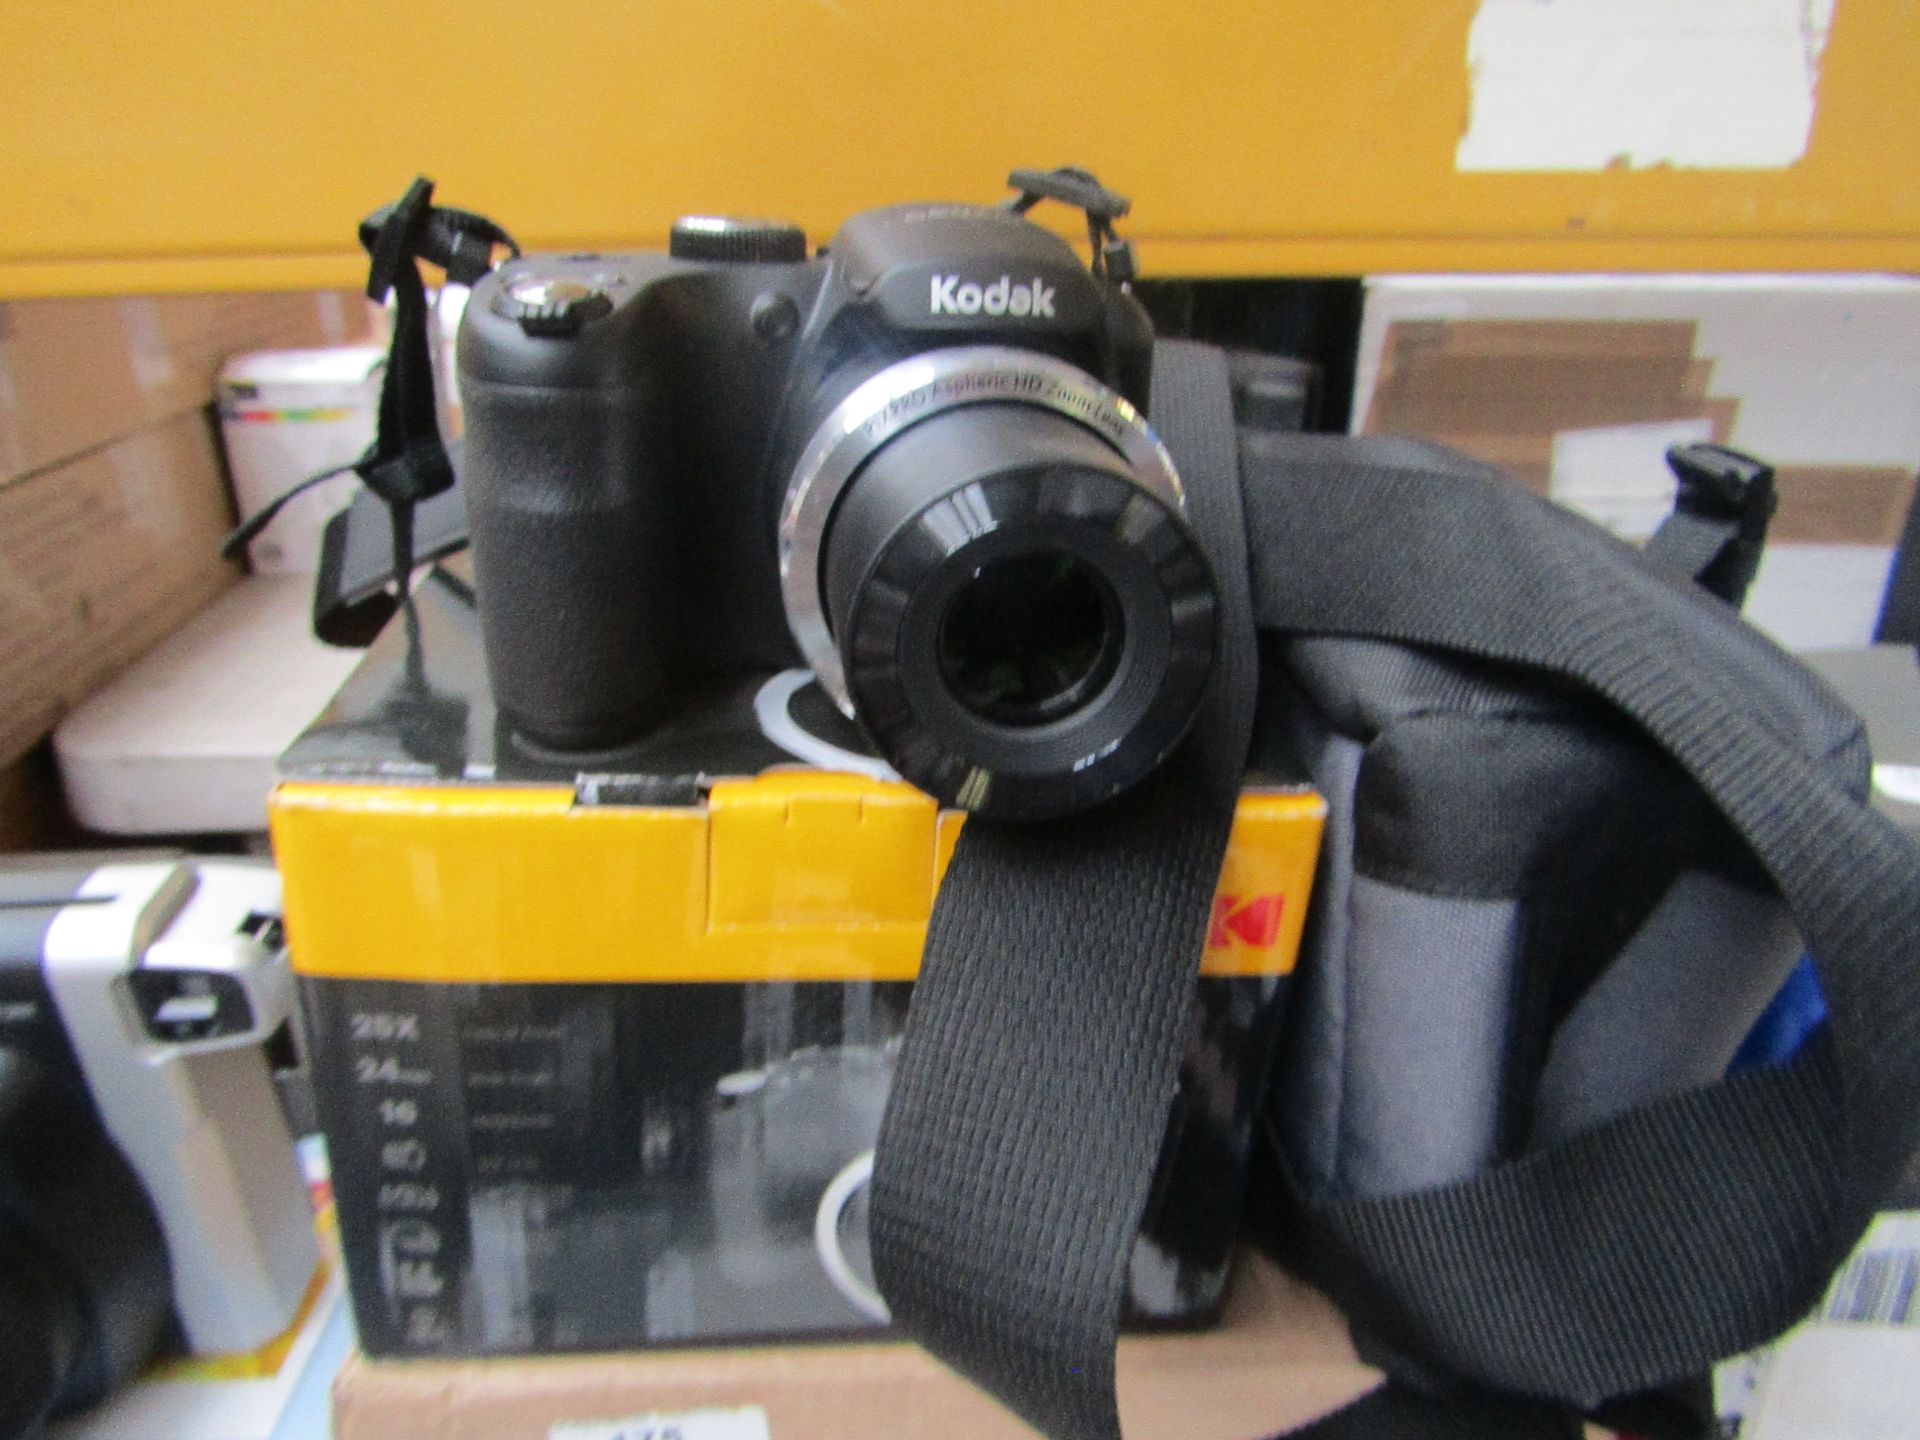 Kodak PixPro AZ252 Camera, comes with bag, batteries & charger - Powers on but may be an issue